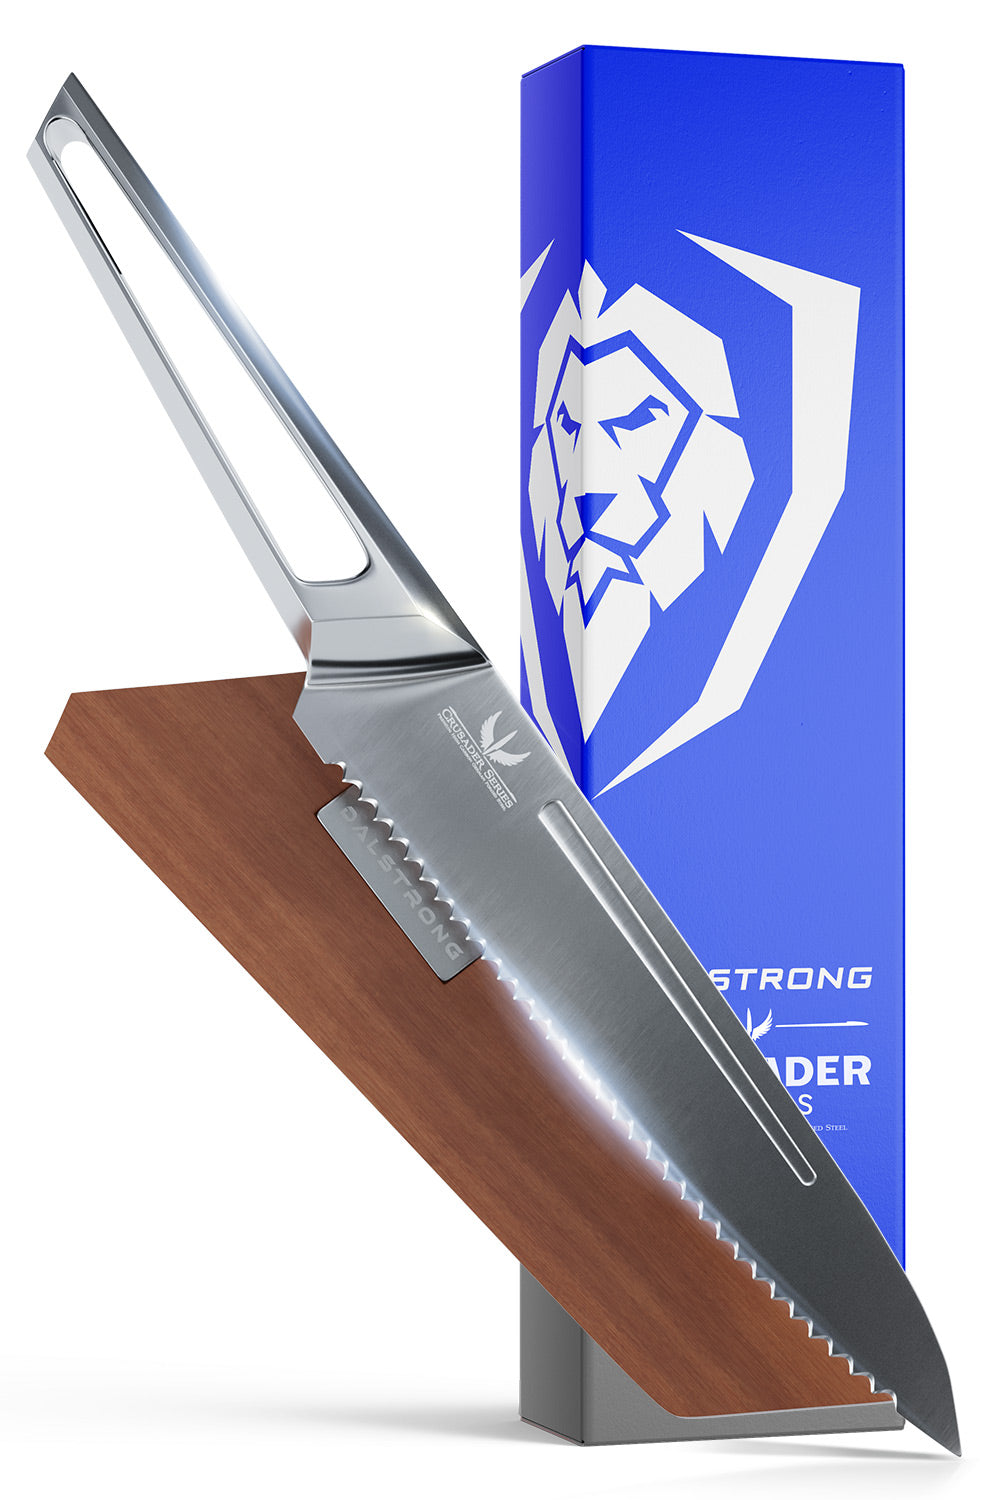 Dalstrong crusader series 5.5 inch serrated utility knife in front of it's premium packaging.